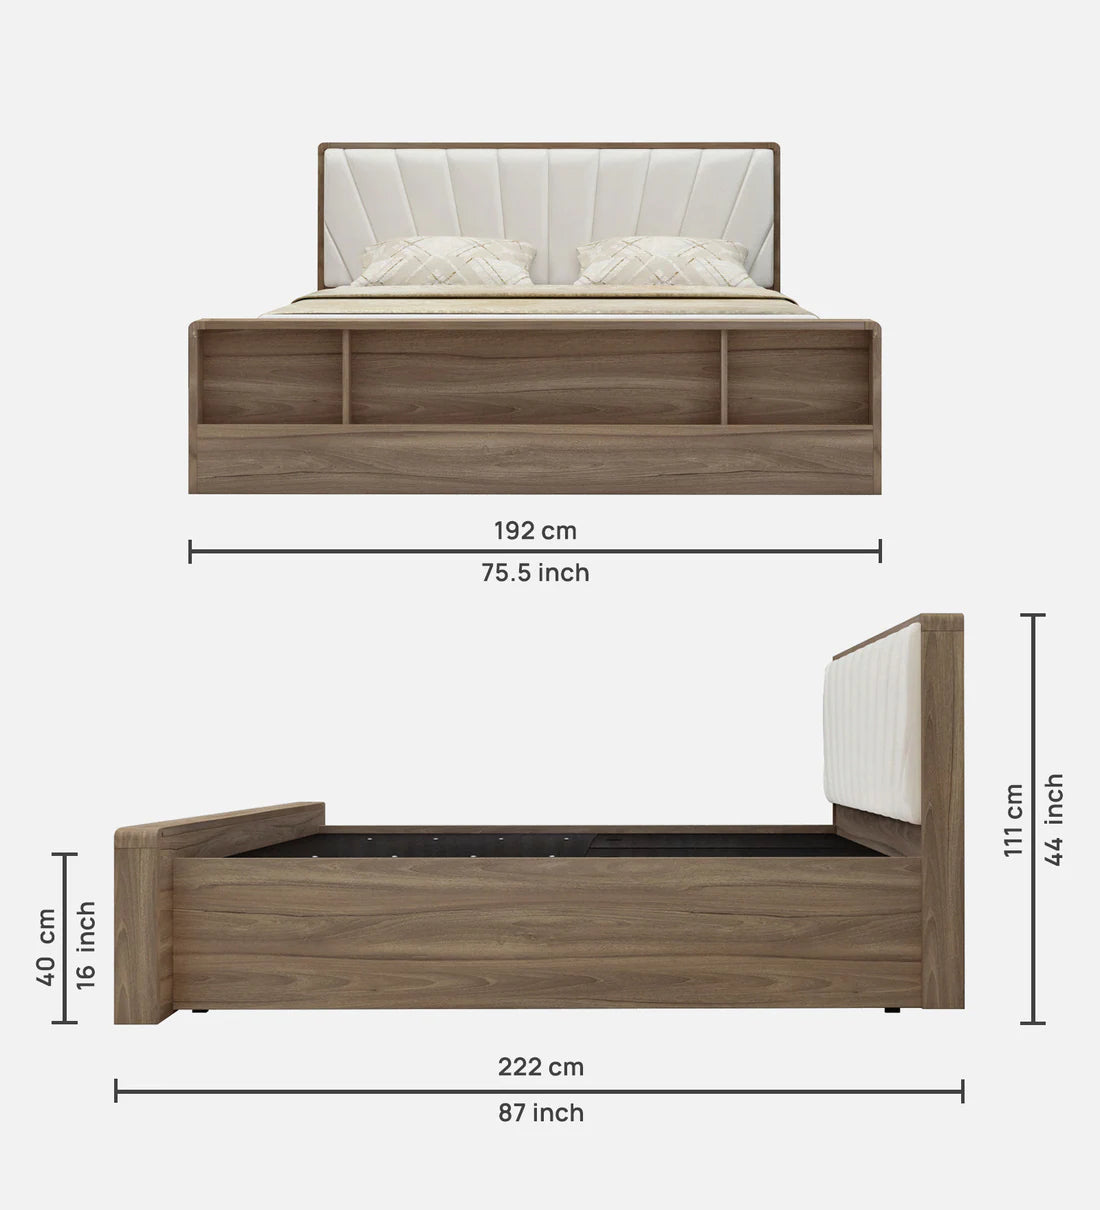 Symo King Size Bed in Bella Noce & Glossy White Colour with Hydraulic Storage